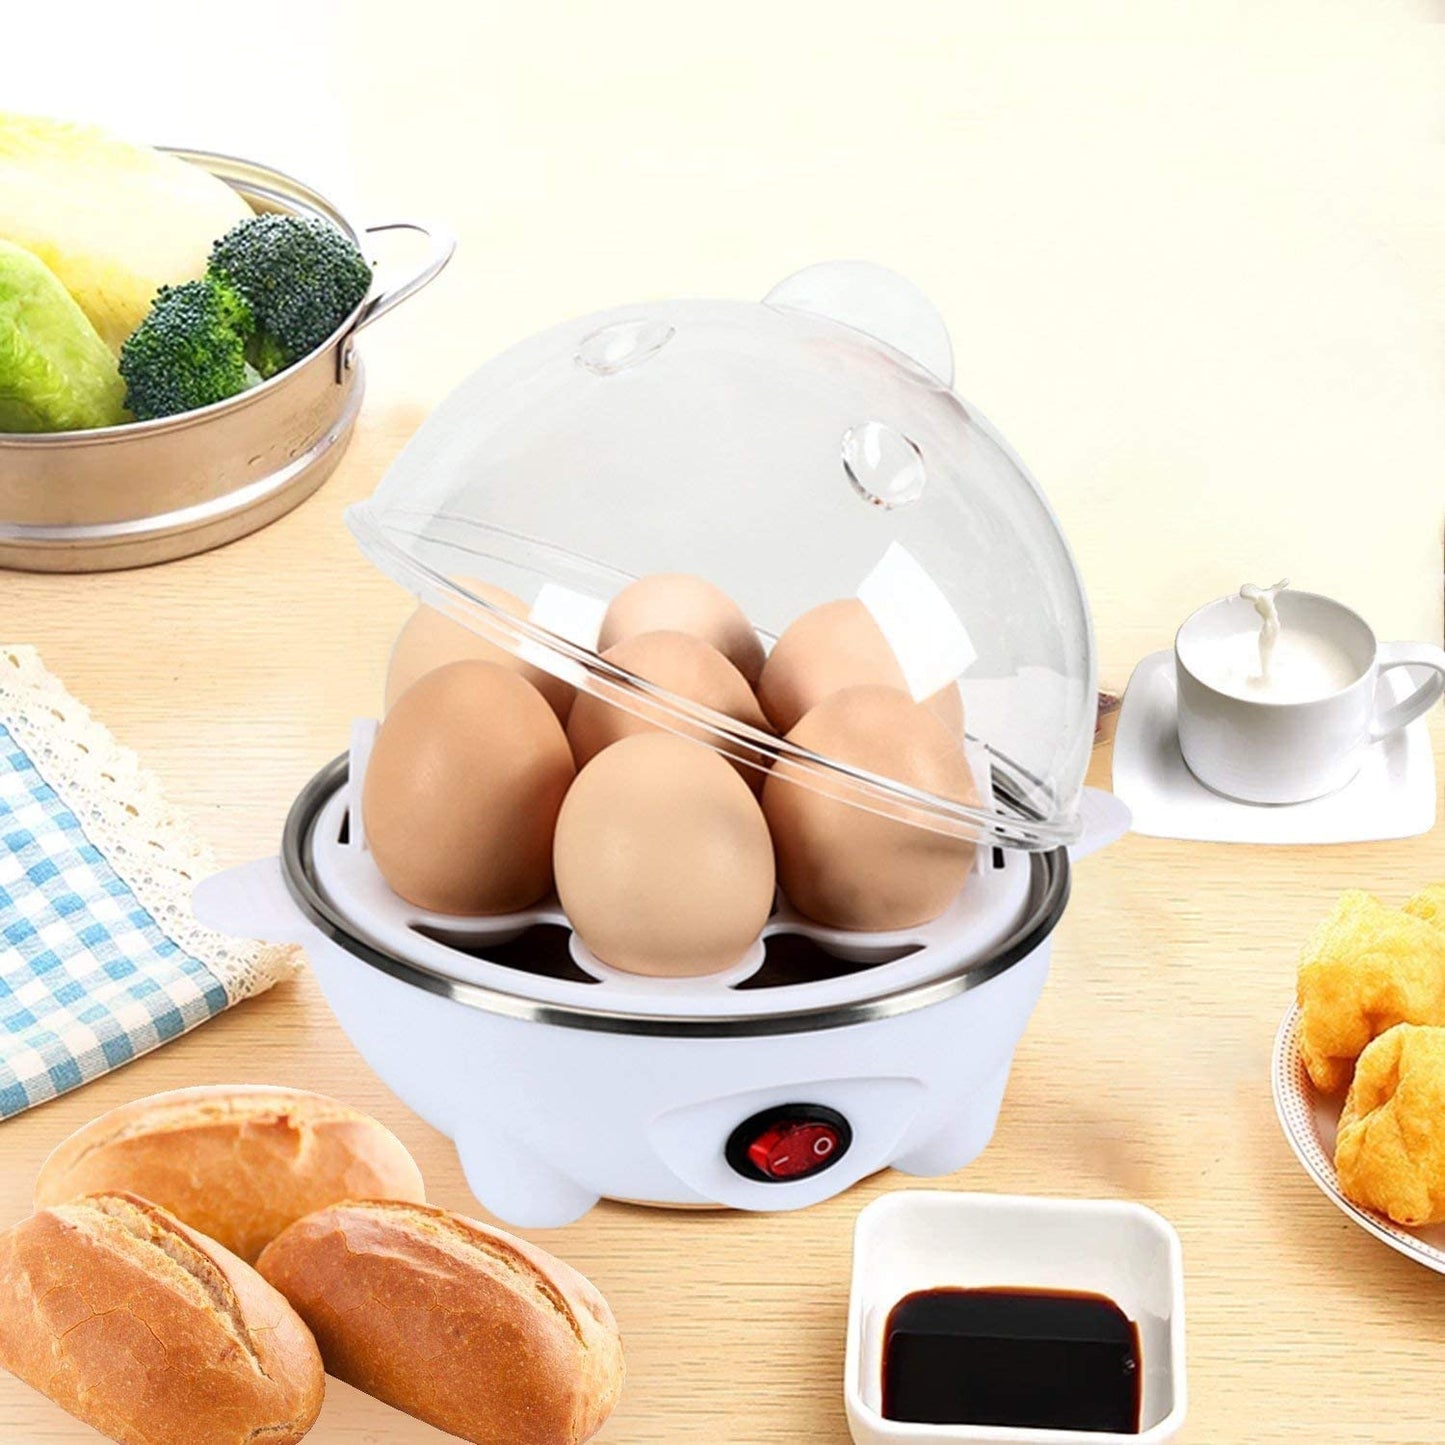 J-JATI Egg Boiler with measuring cup, 7 cup capacity - 12/CASE